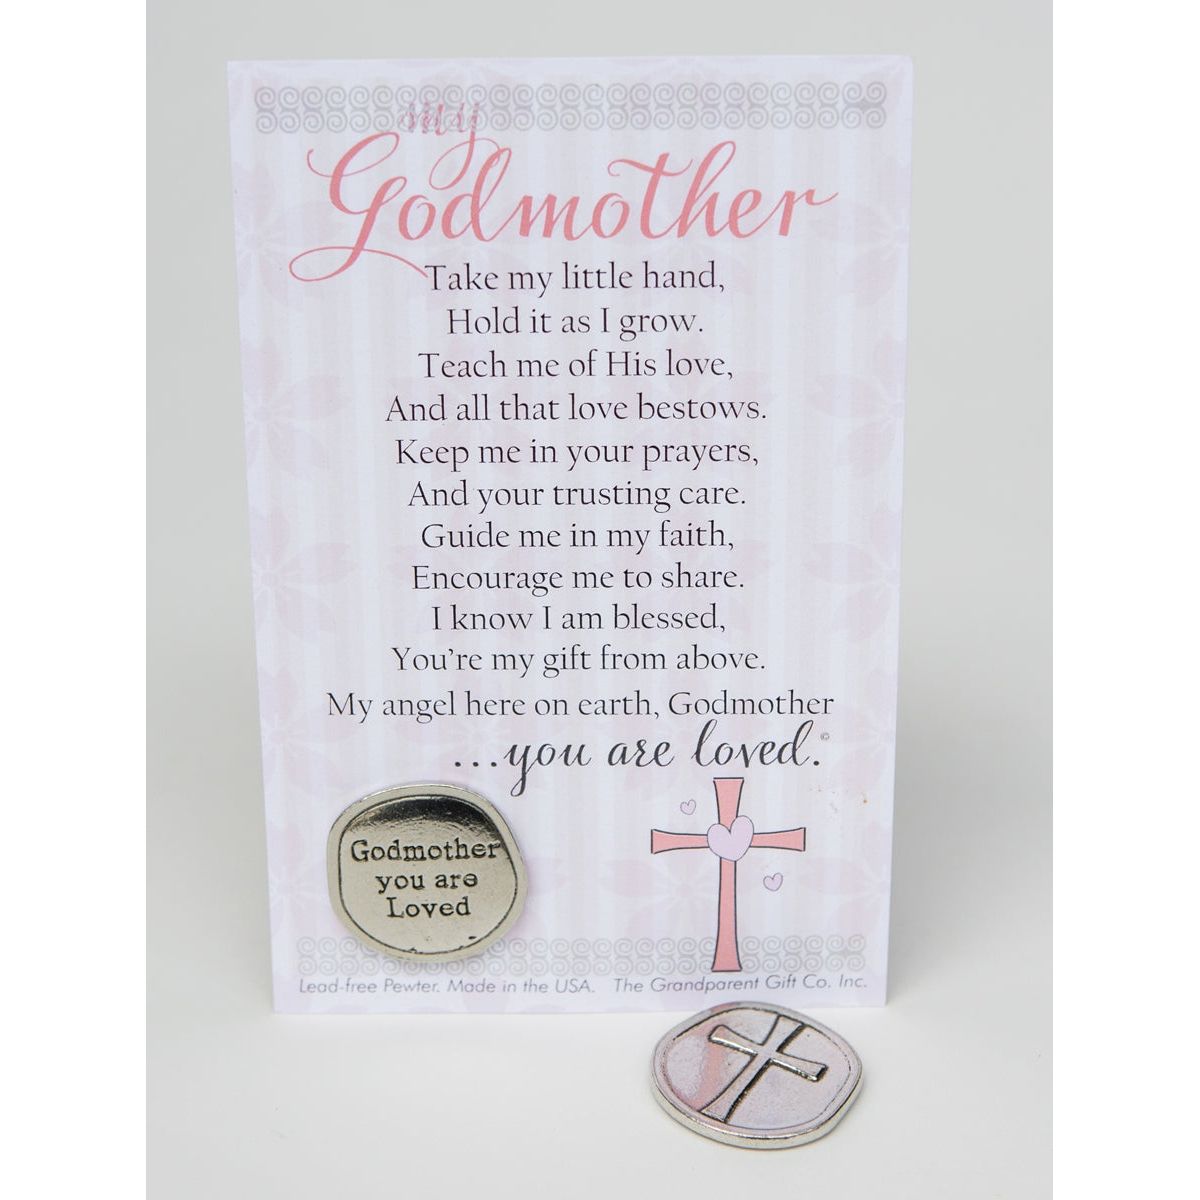 Godmother Gift: Handmade pewter coin with &quot;Godmother you are Loved&quot; on one side and a cross on the other, packaged in a clear bag with &quot;My Godmother&quot; poem.